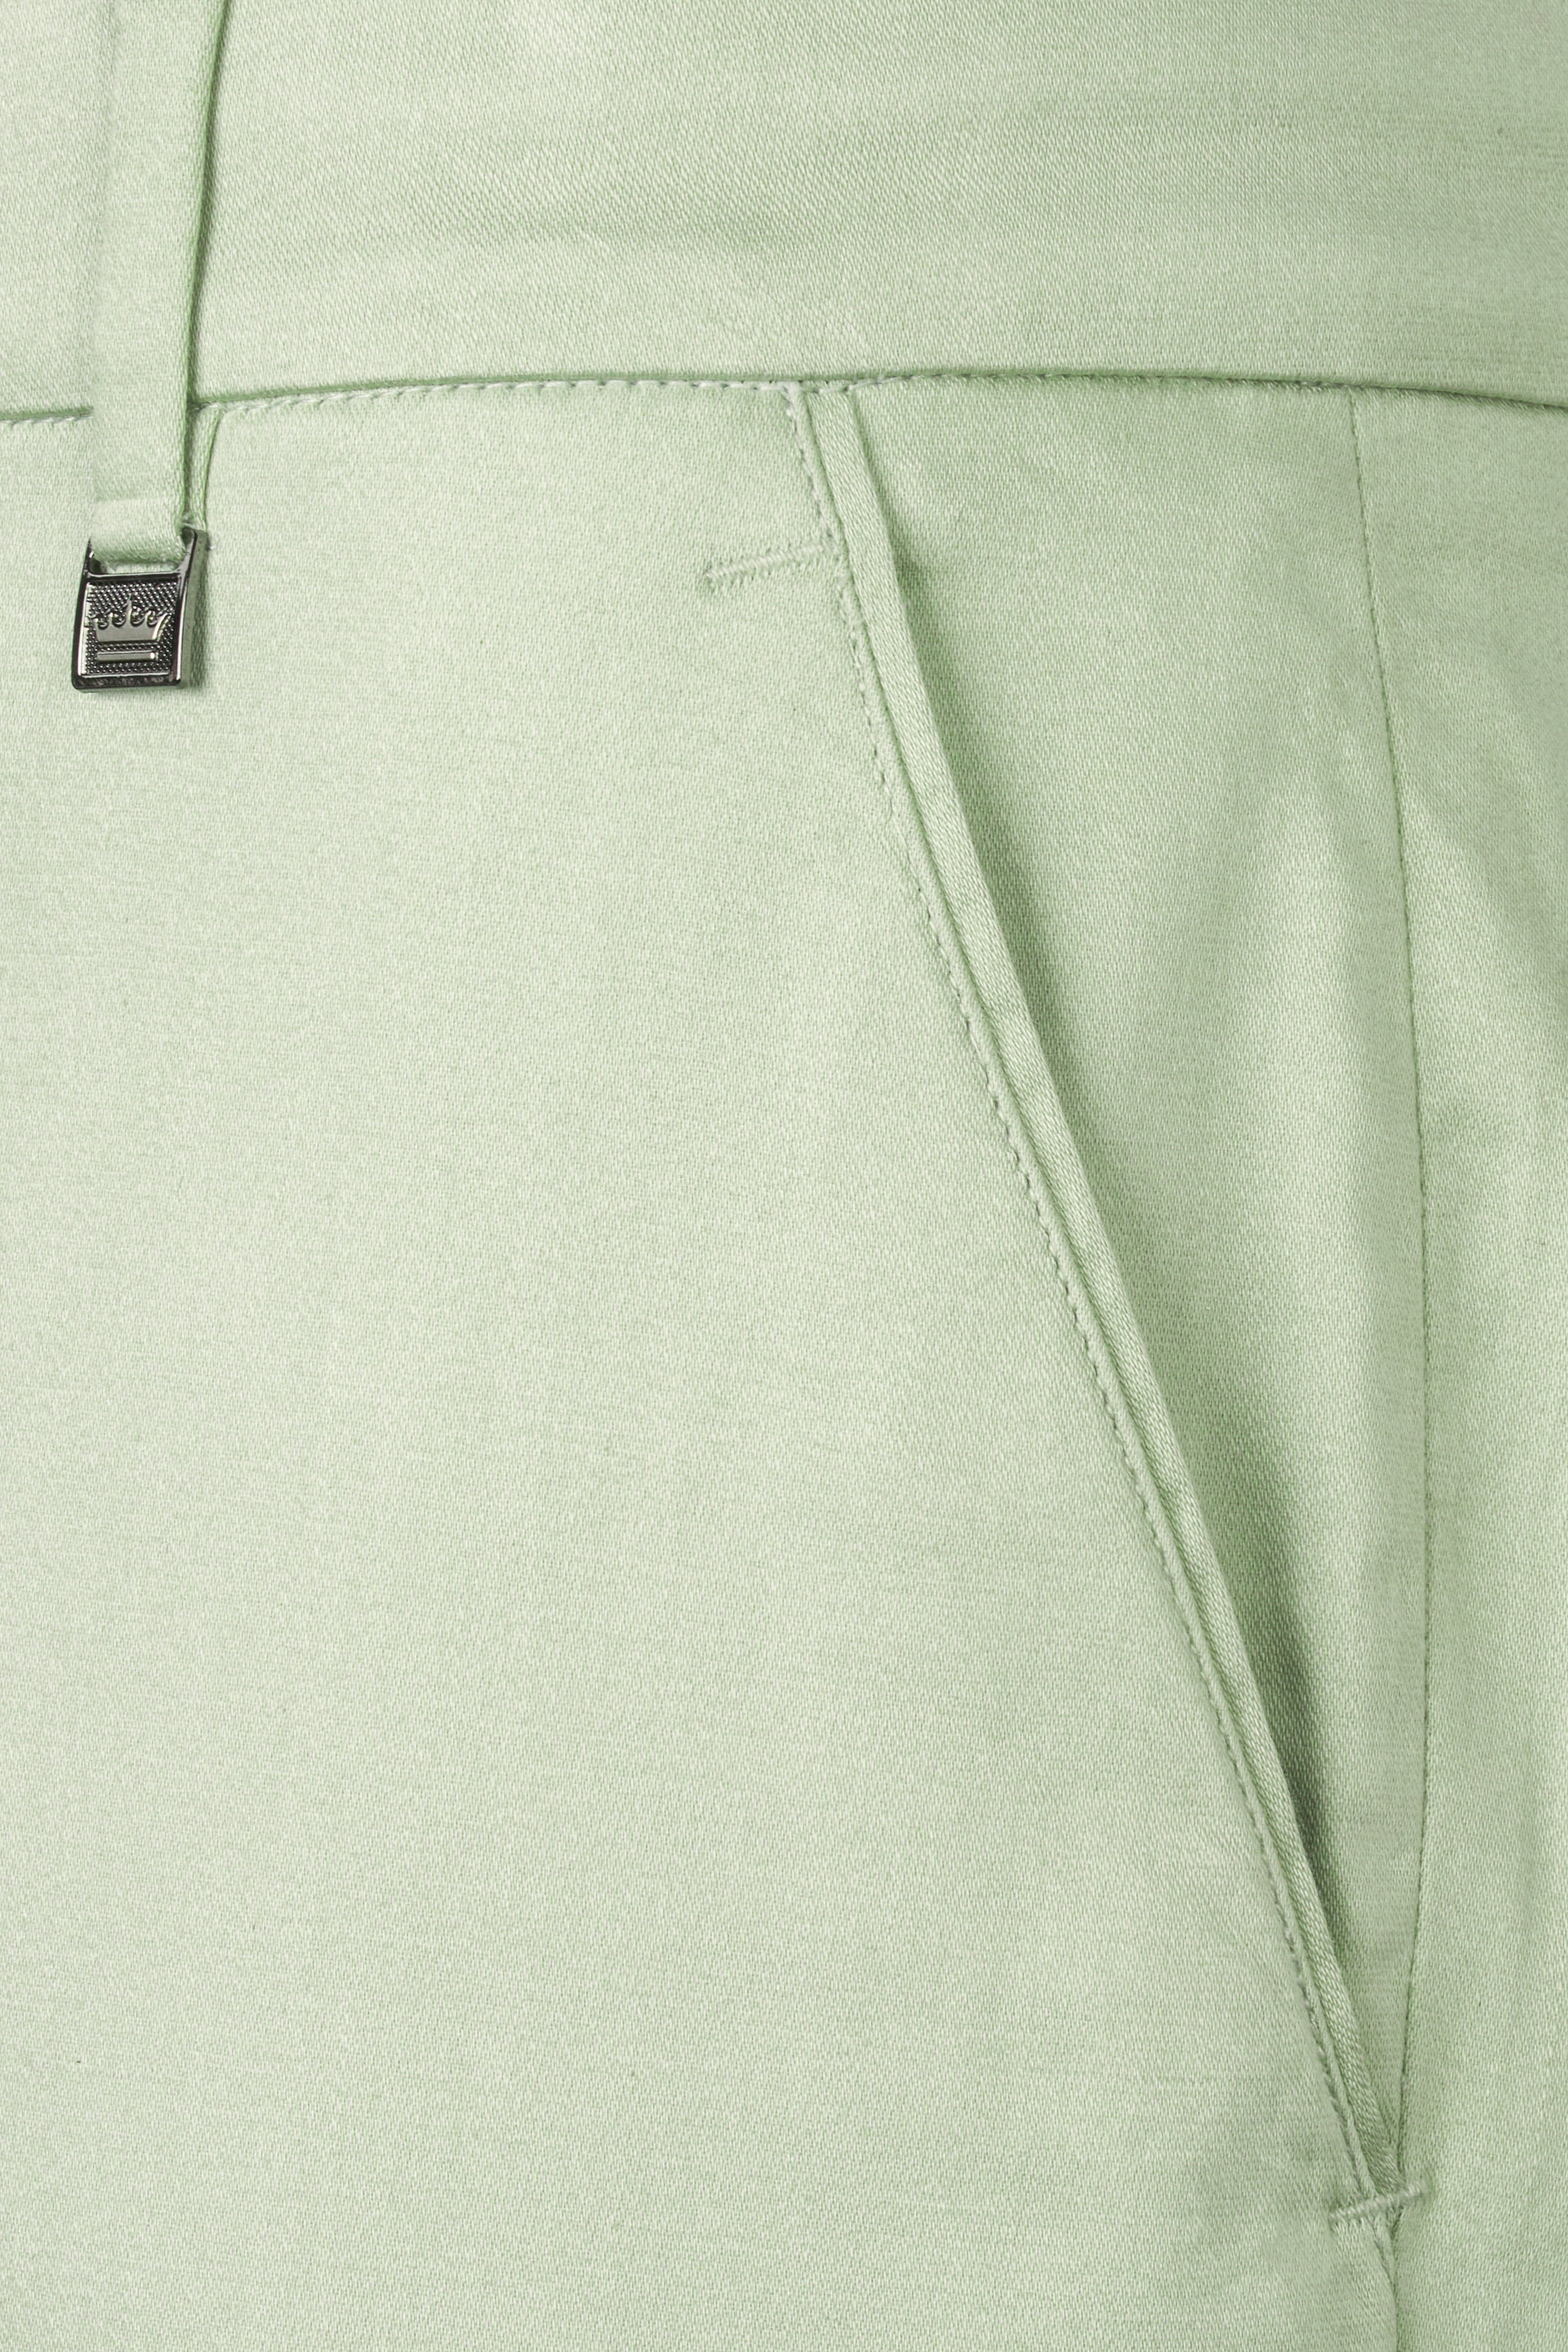 Coriander Green Double Breasted Premium Cotton Stretchable traveler Suit ST2793-DB36, ST2793-DB38, ST2793-DB40, ST2793-DB42, ST2793-DB44, ST2793-DB46, ST2793-DB48, ST2793-DB50, ST2793-DB52, ST2793-DB54, ST2793-DB56, ST2793-DB58, ST2793-DB60